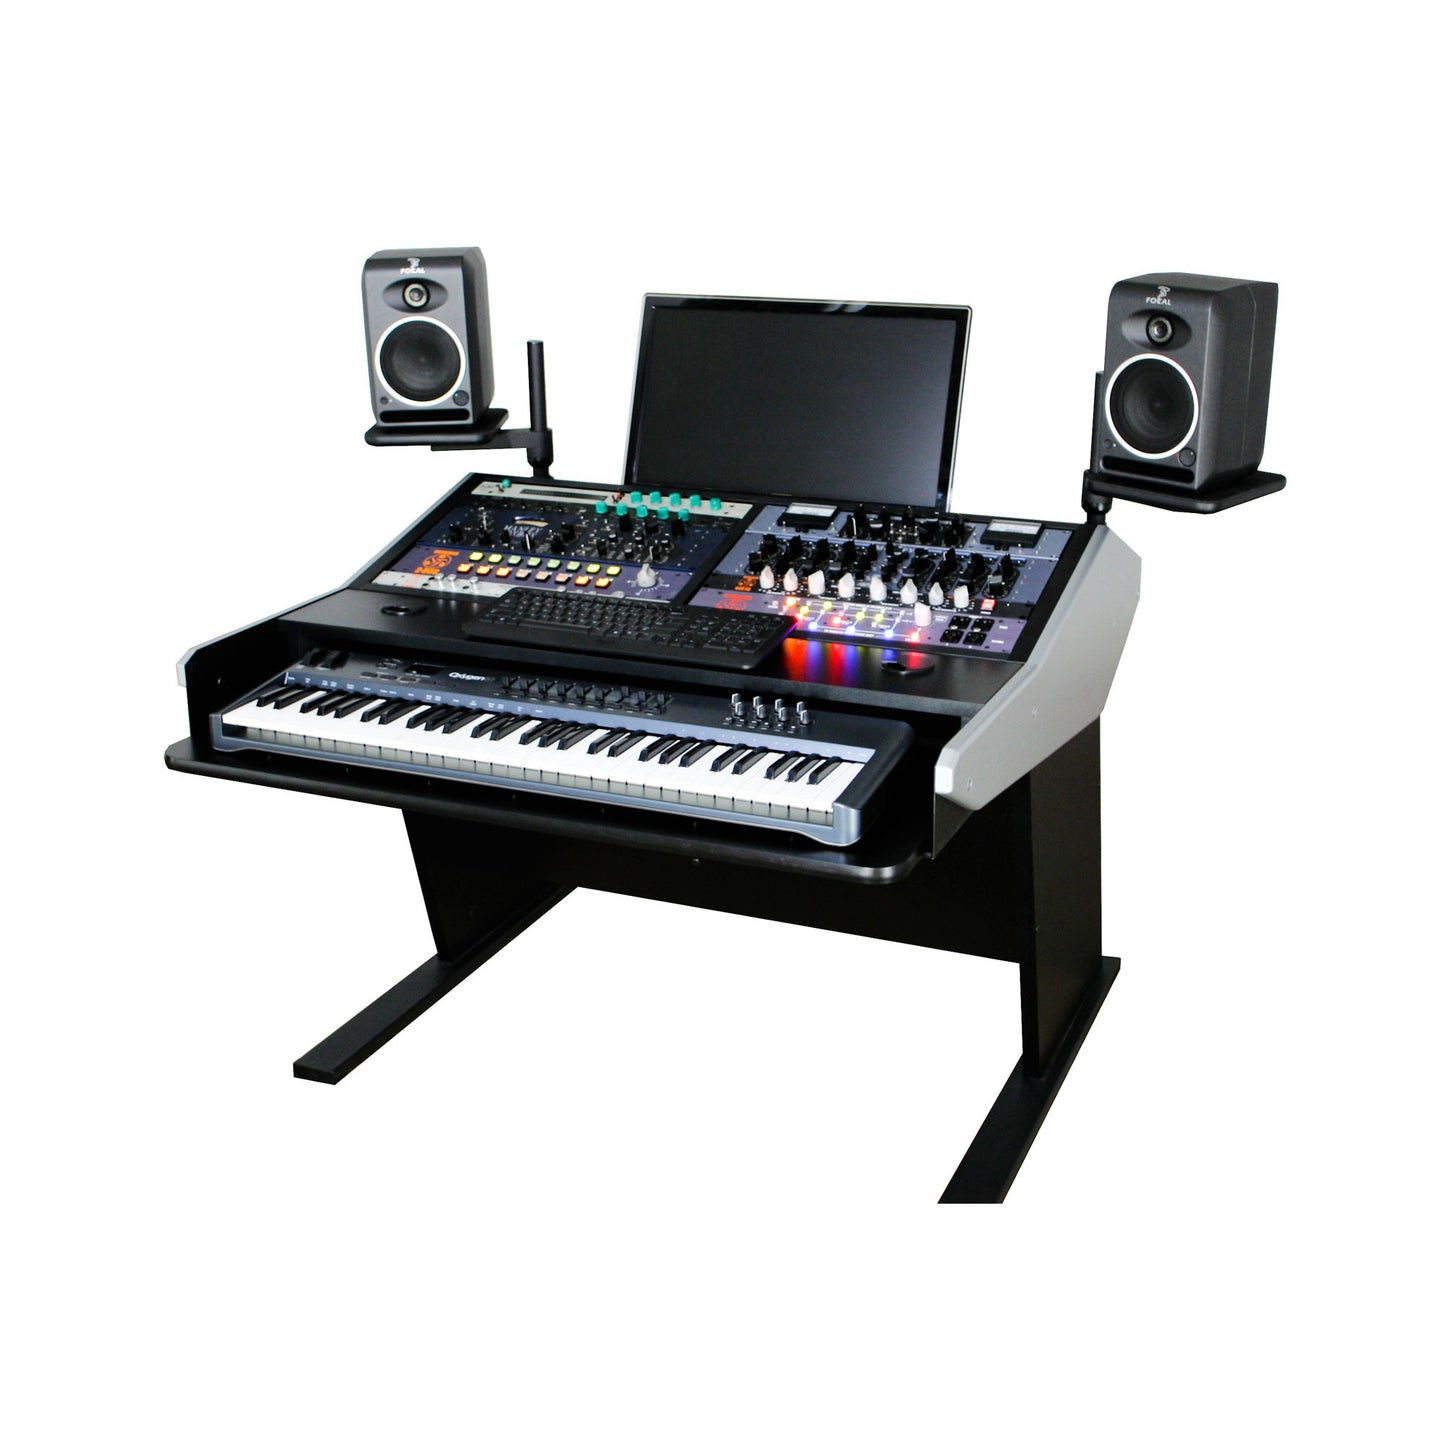 Sterling Modular Two Bay Multi-Station Console - Keyboard Composer Desk Surface